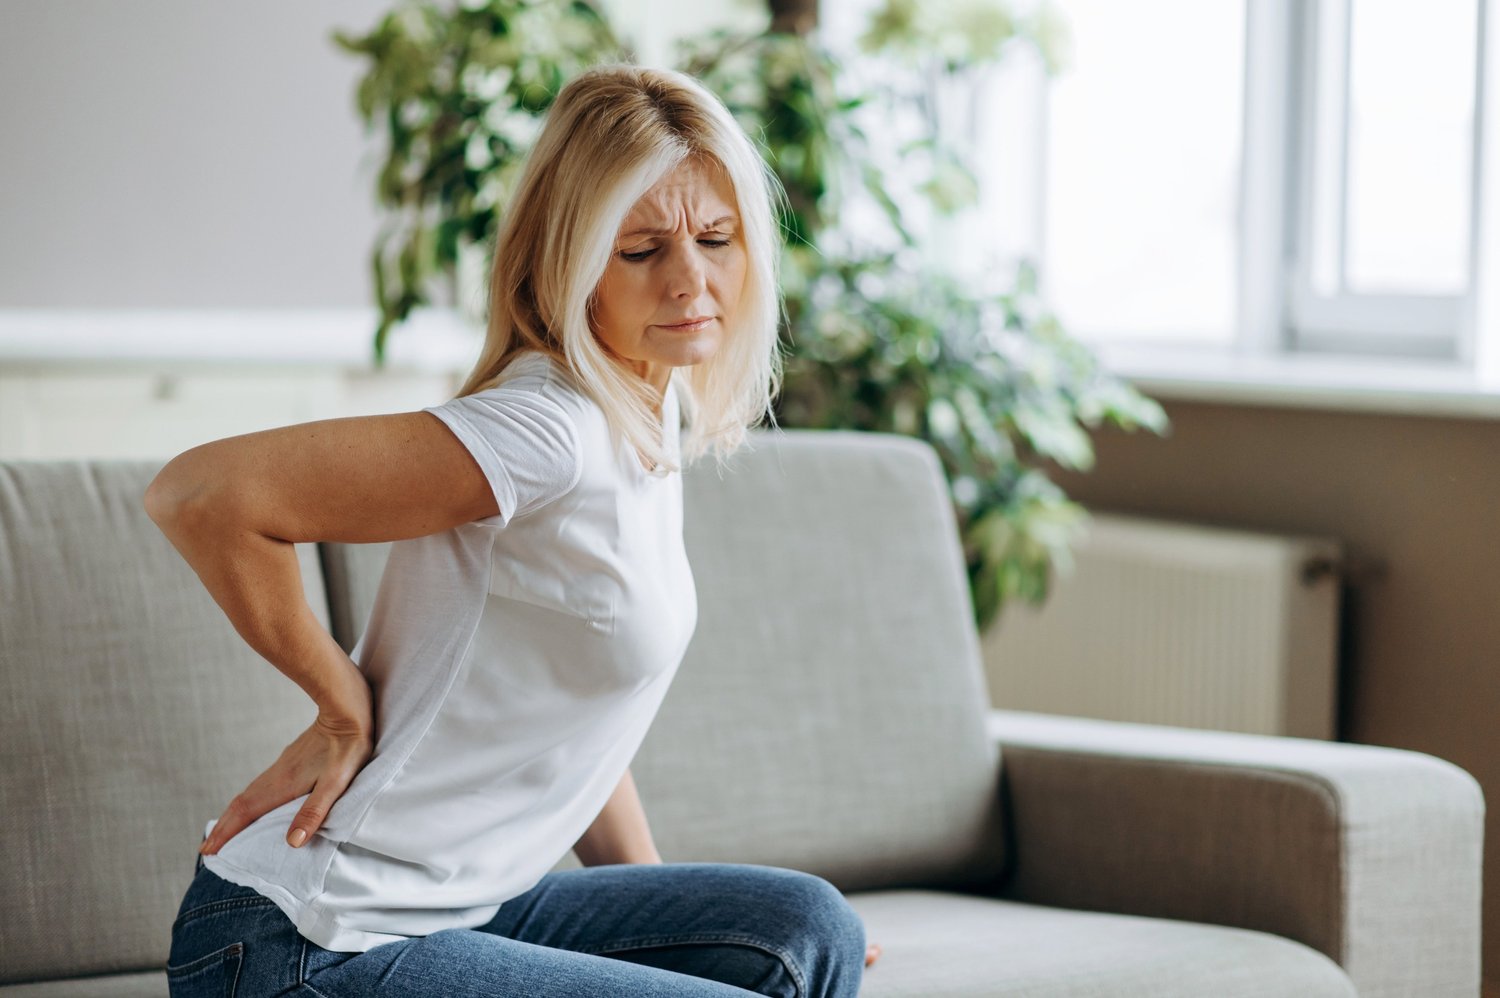 Woman holding back in pain